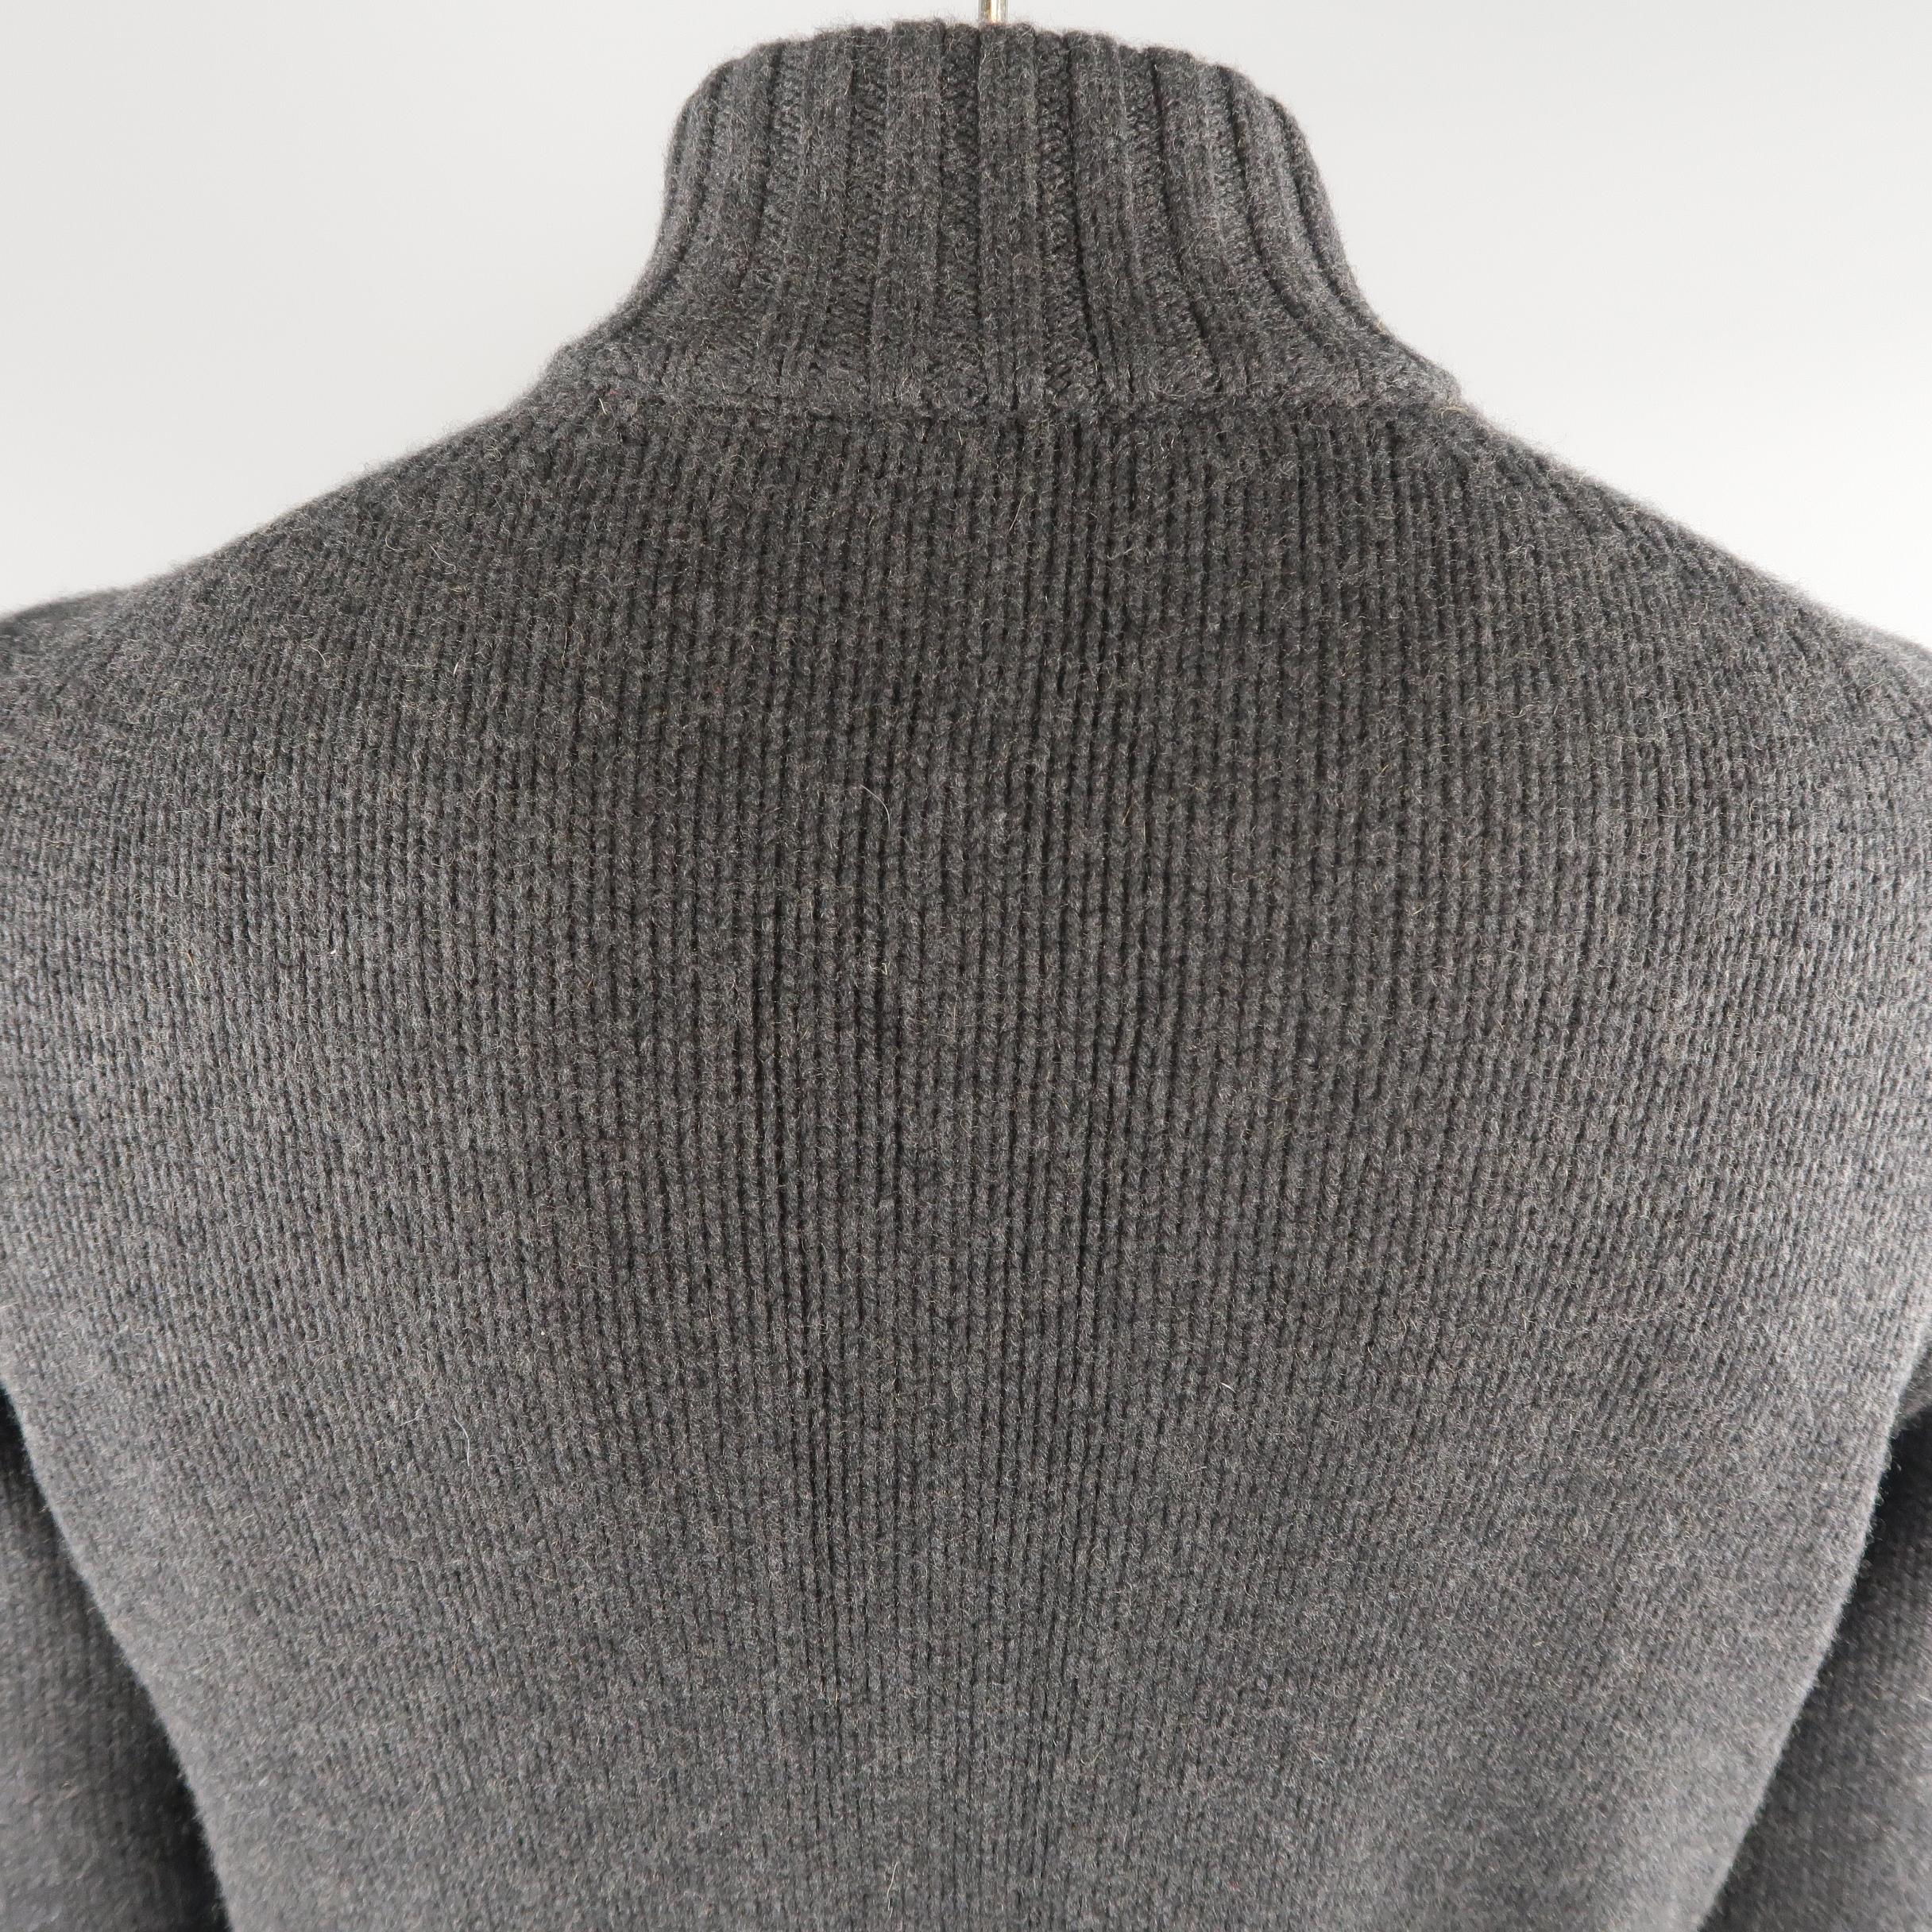 BRUNELLO CUCINELLI Size 42 Charcoal Knitted Cashmere Pullover Sweater 1